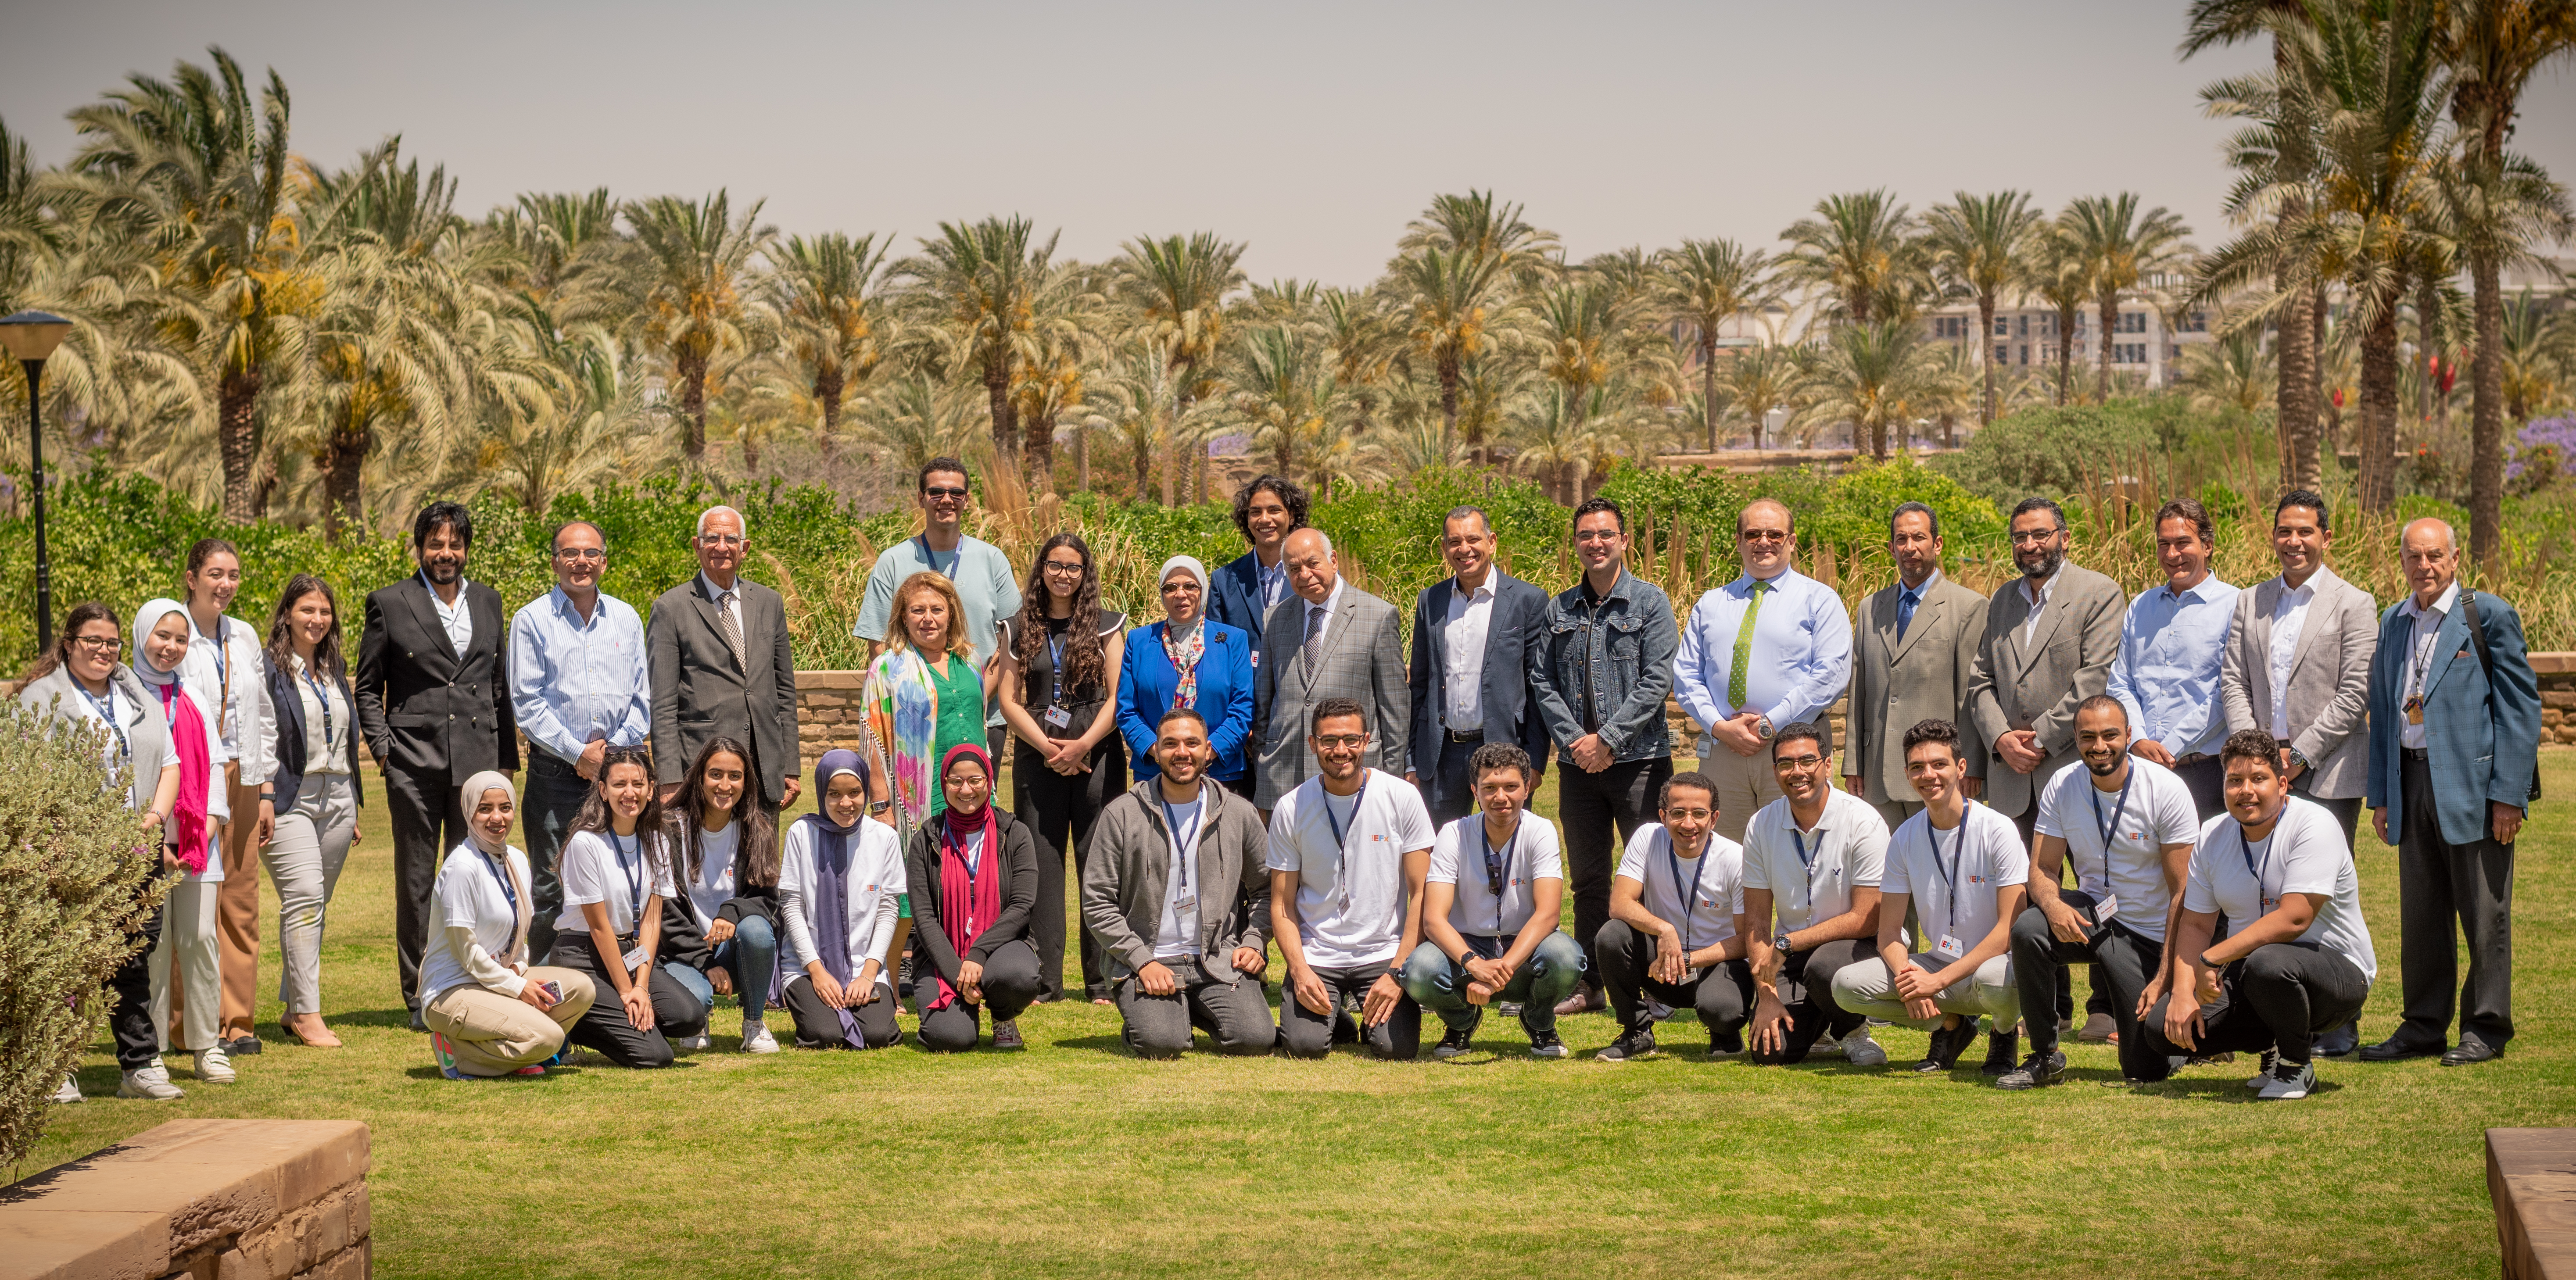 The ASME team poses on the gardens at AUC. 